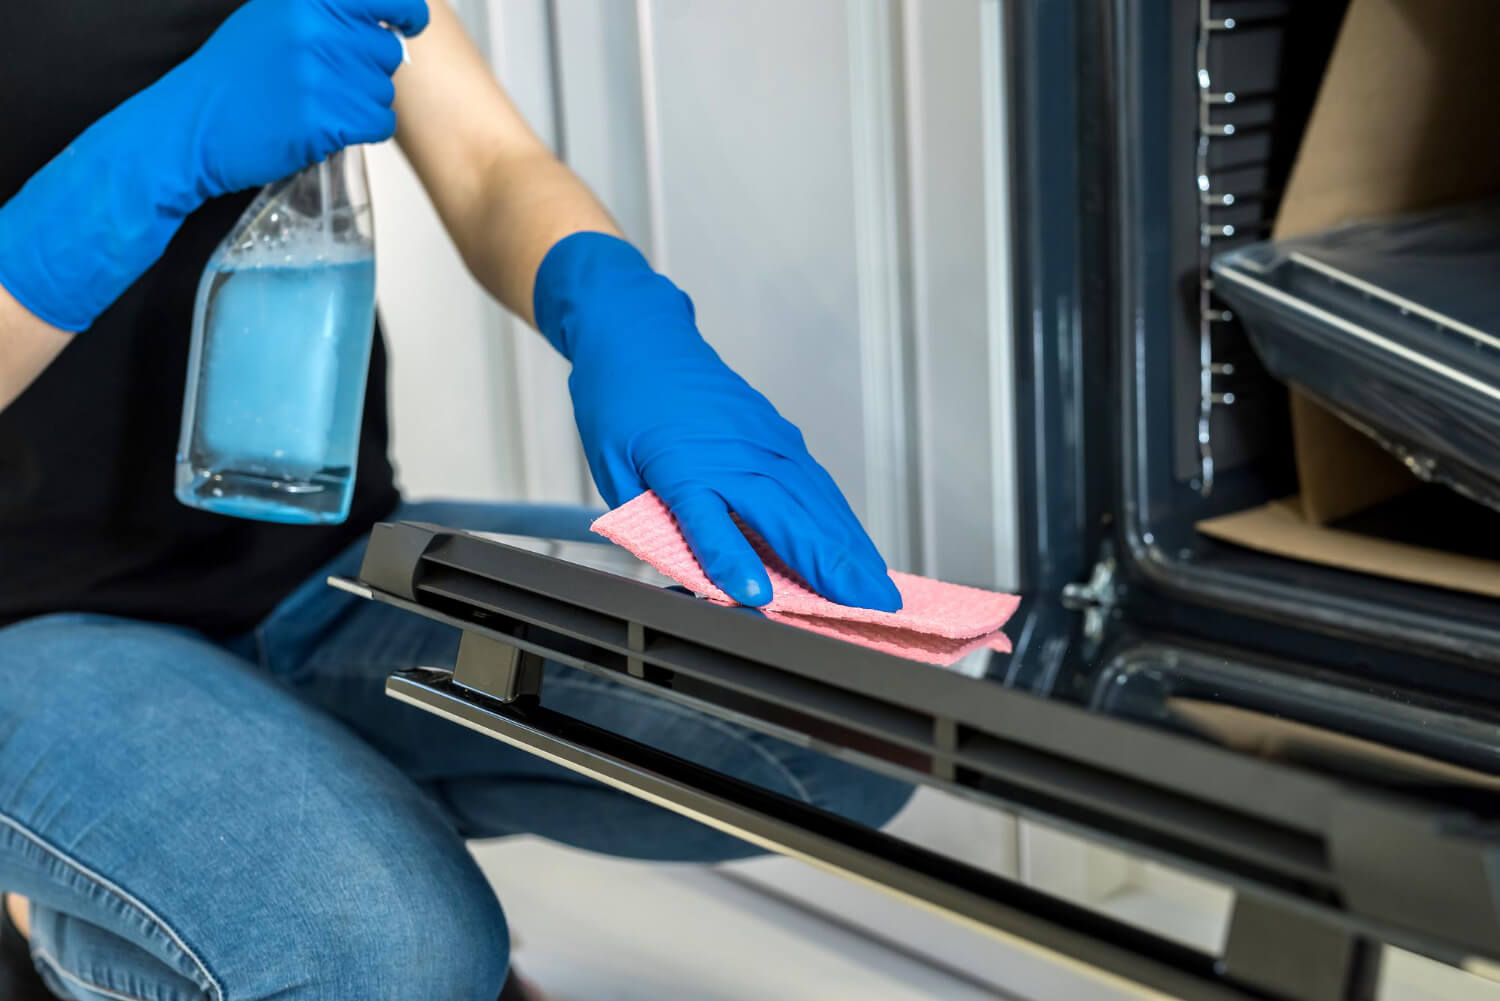 young woman cleaning oven with blue rubber gloves close up